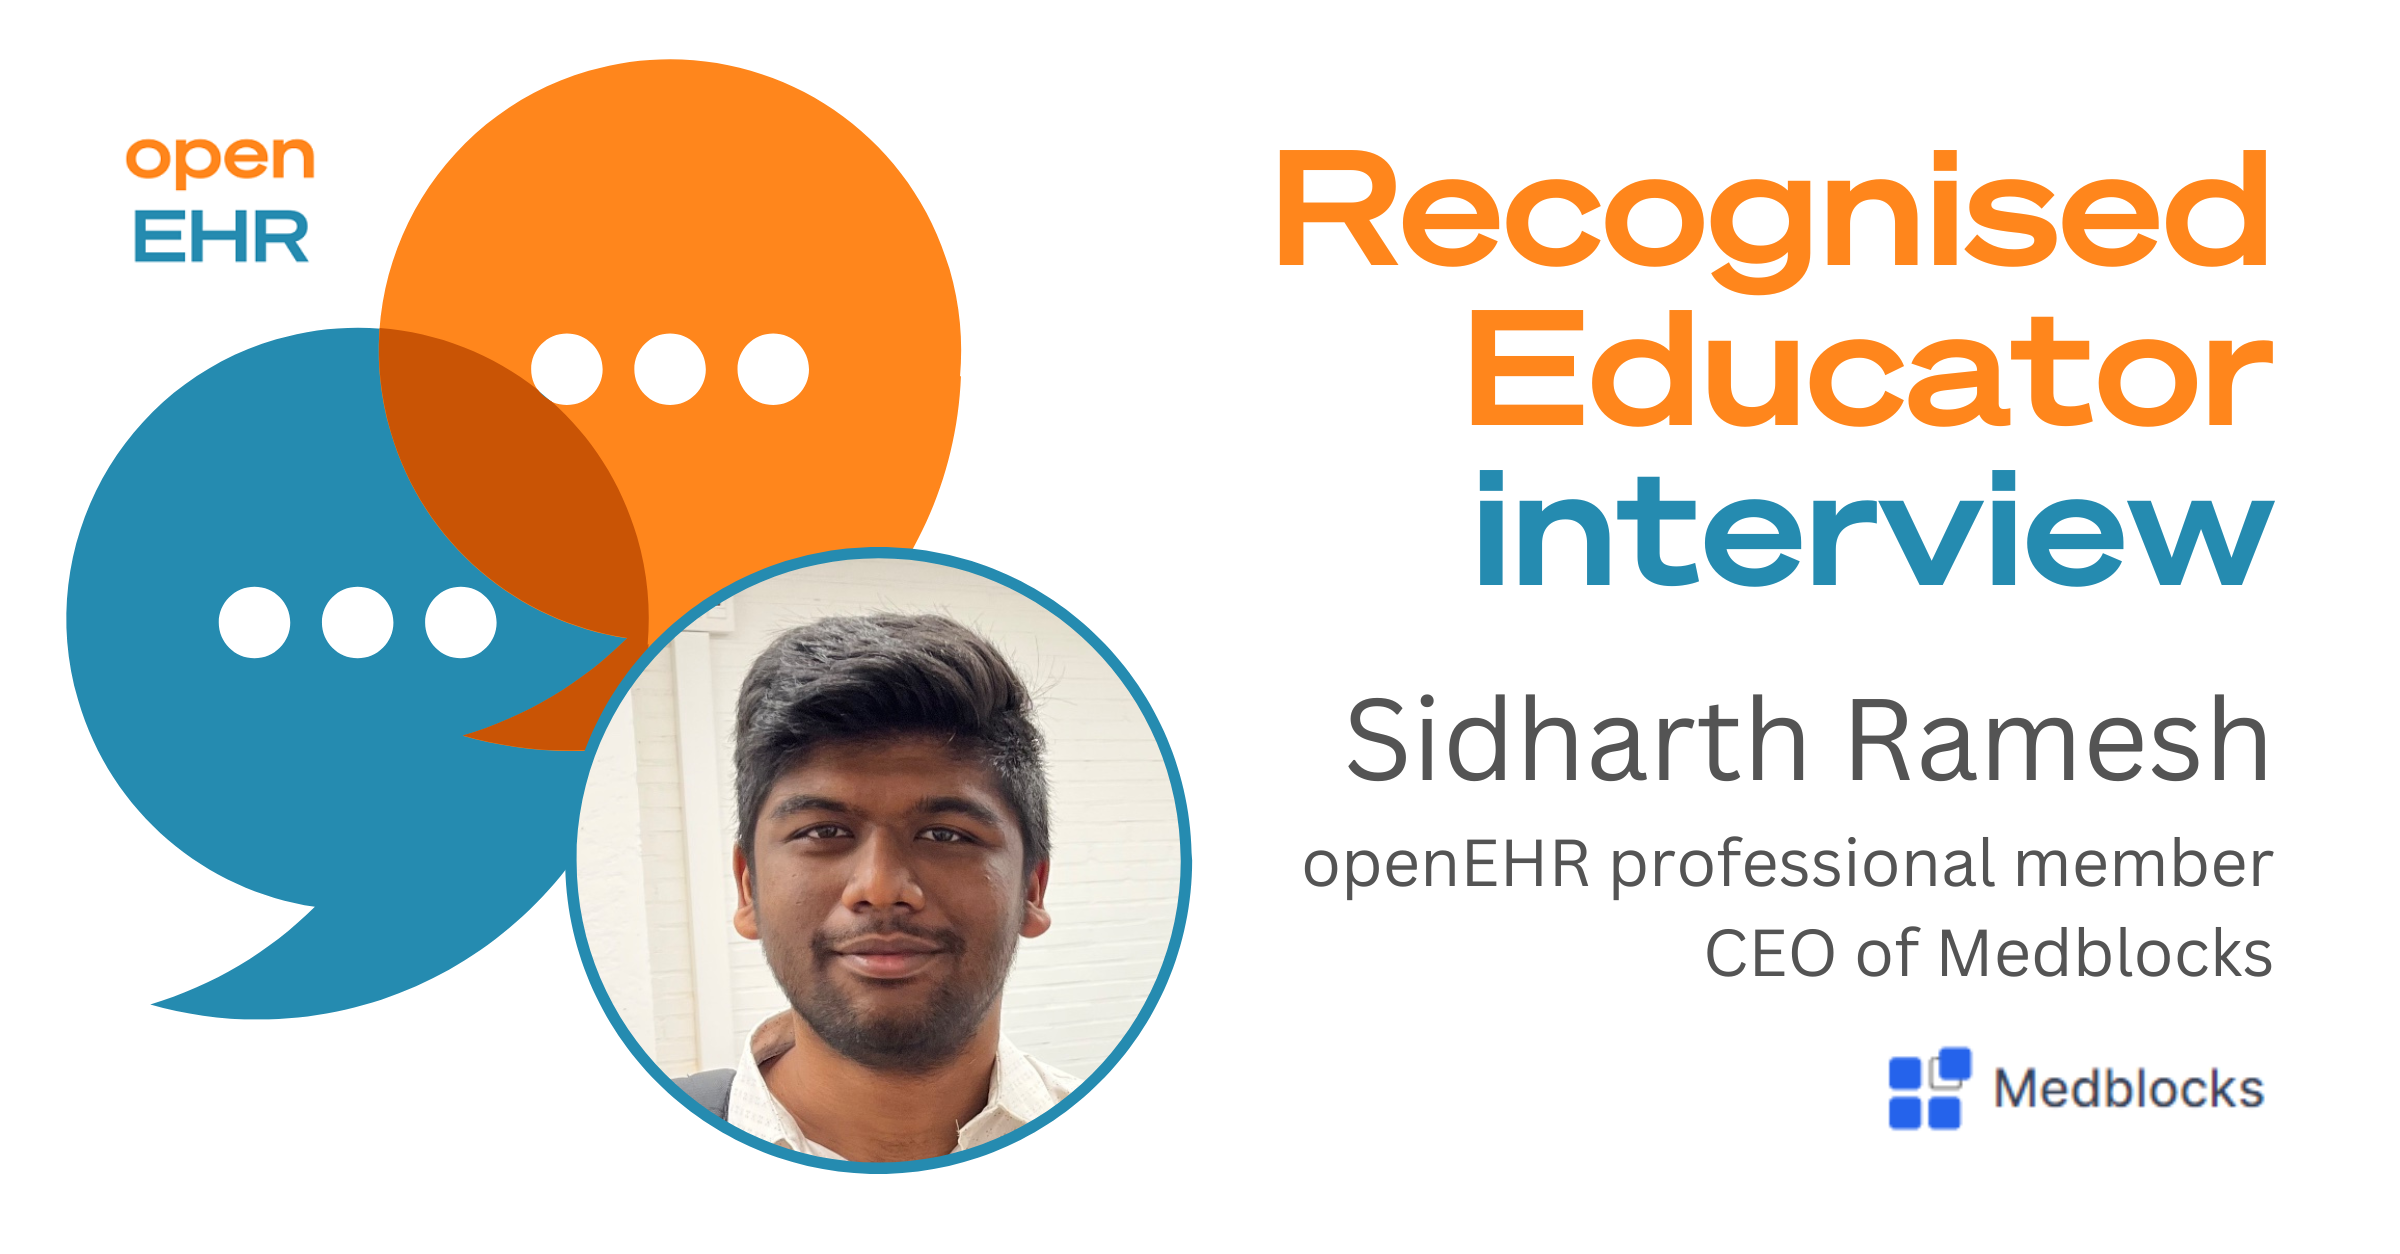 Sidharth Ramesh, CEO of Medblocks and recognised openEHR educator